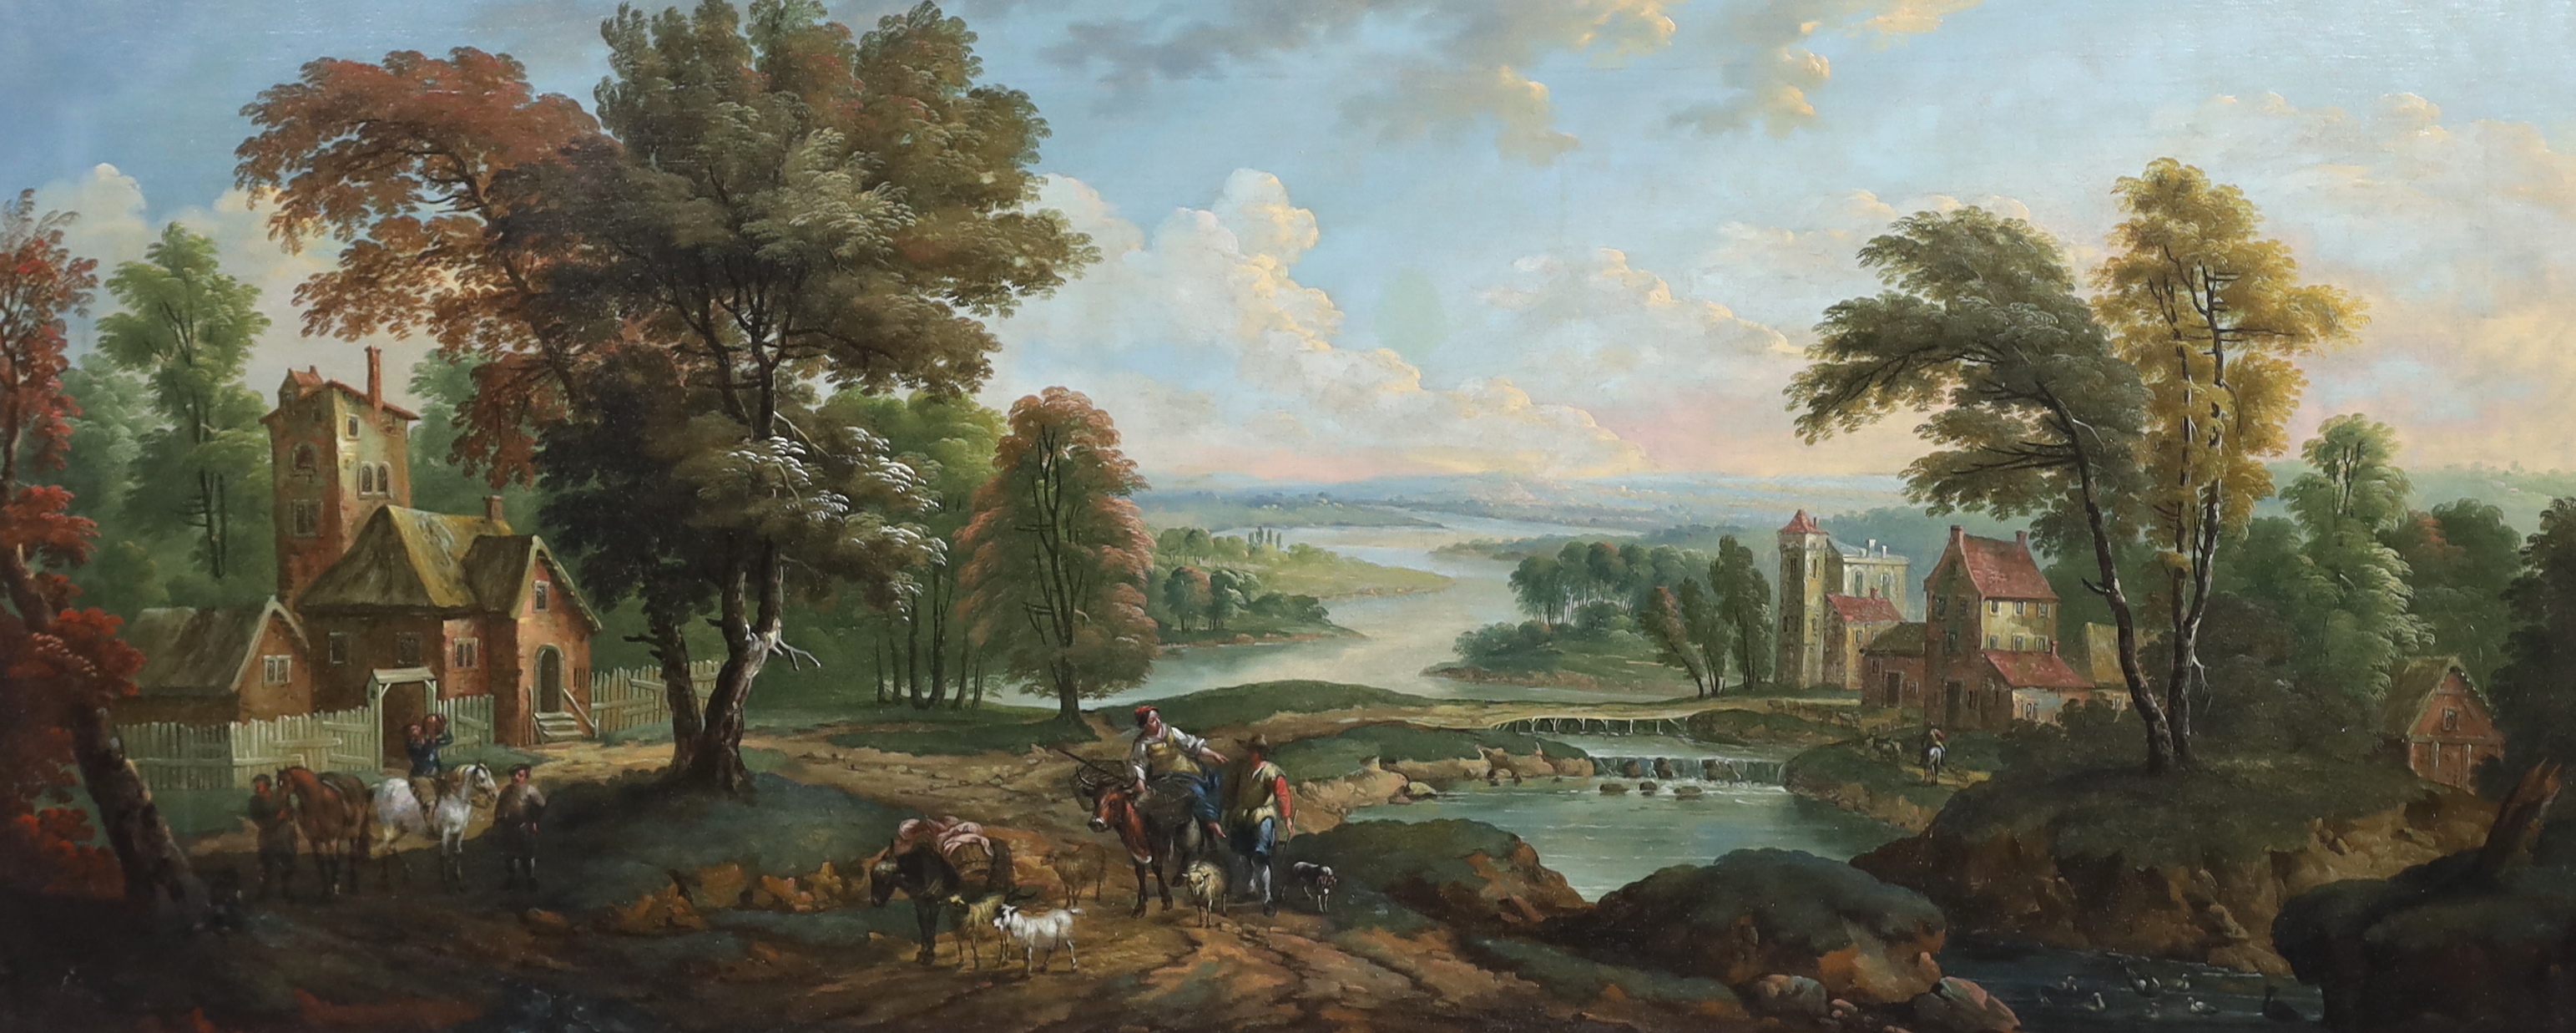 Flemish School , Extensive pastoral landscape with figures on their way to market, oil on canvas, 63 x 147cm